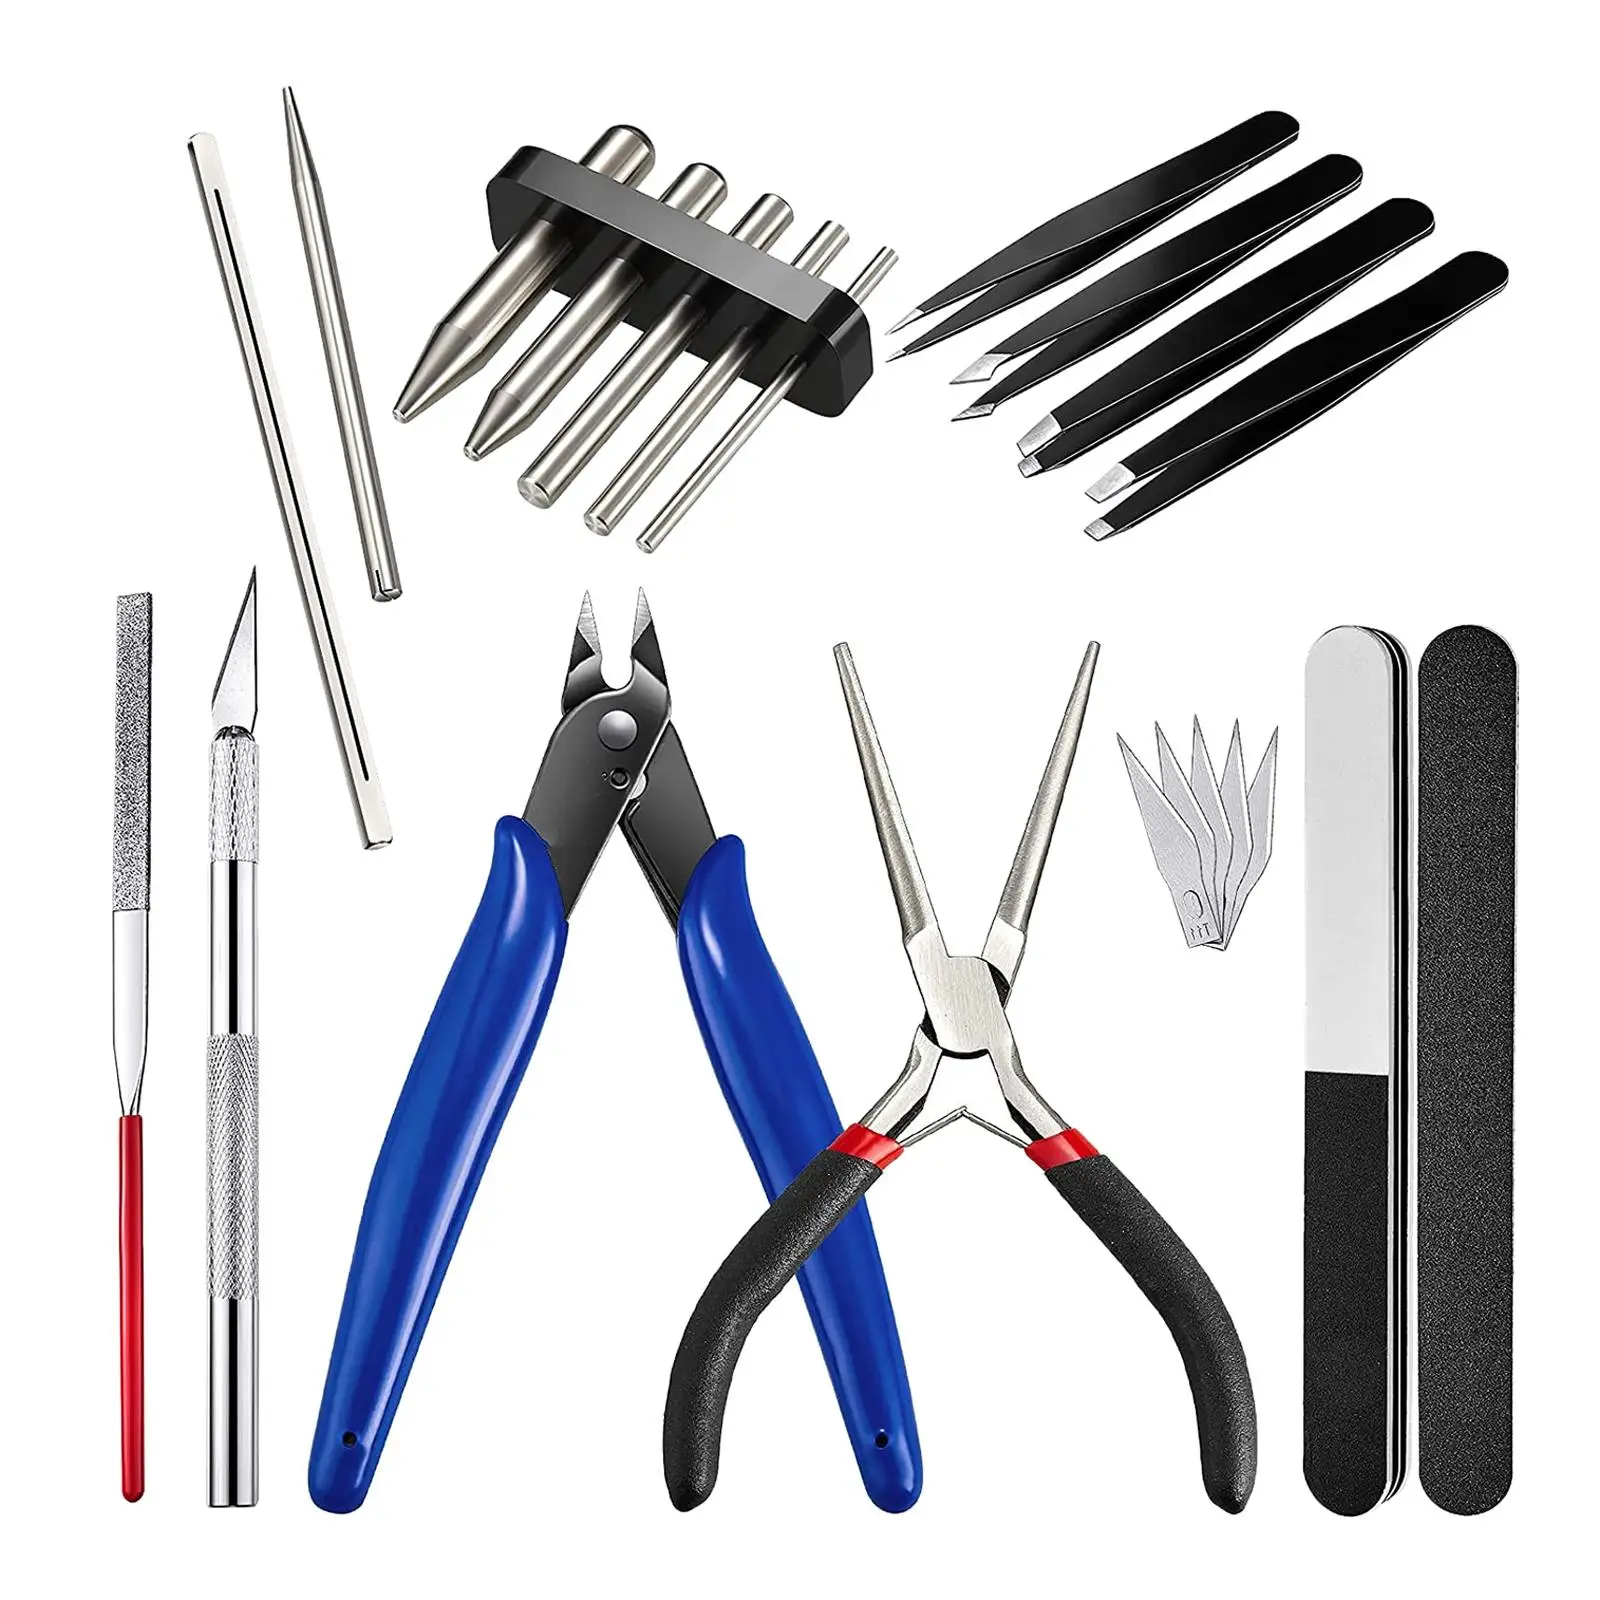 17 Pieces Metal Puzzle Tool Set DIY  Pliers for Basic Model  Metal Jigsaw Puzzles Assembly Laboratory Work Sodlering